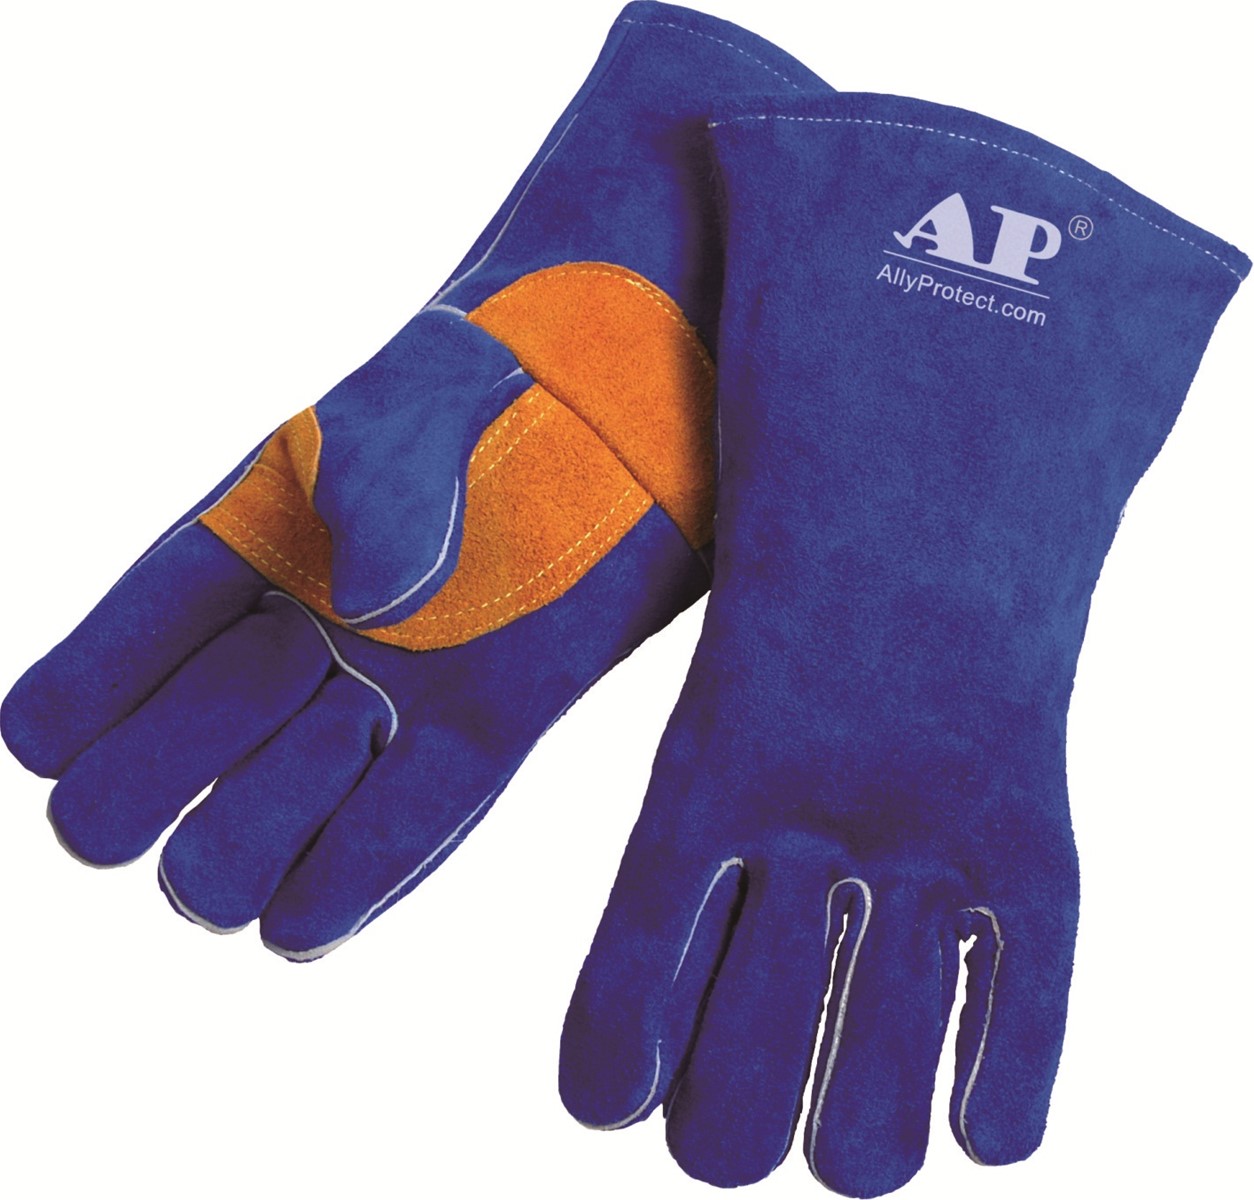 AP1201 High Quality Safety Leather Welding Gloves Coe Gloves Split Glove